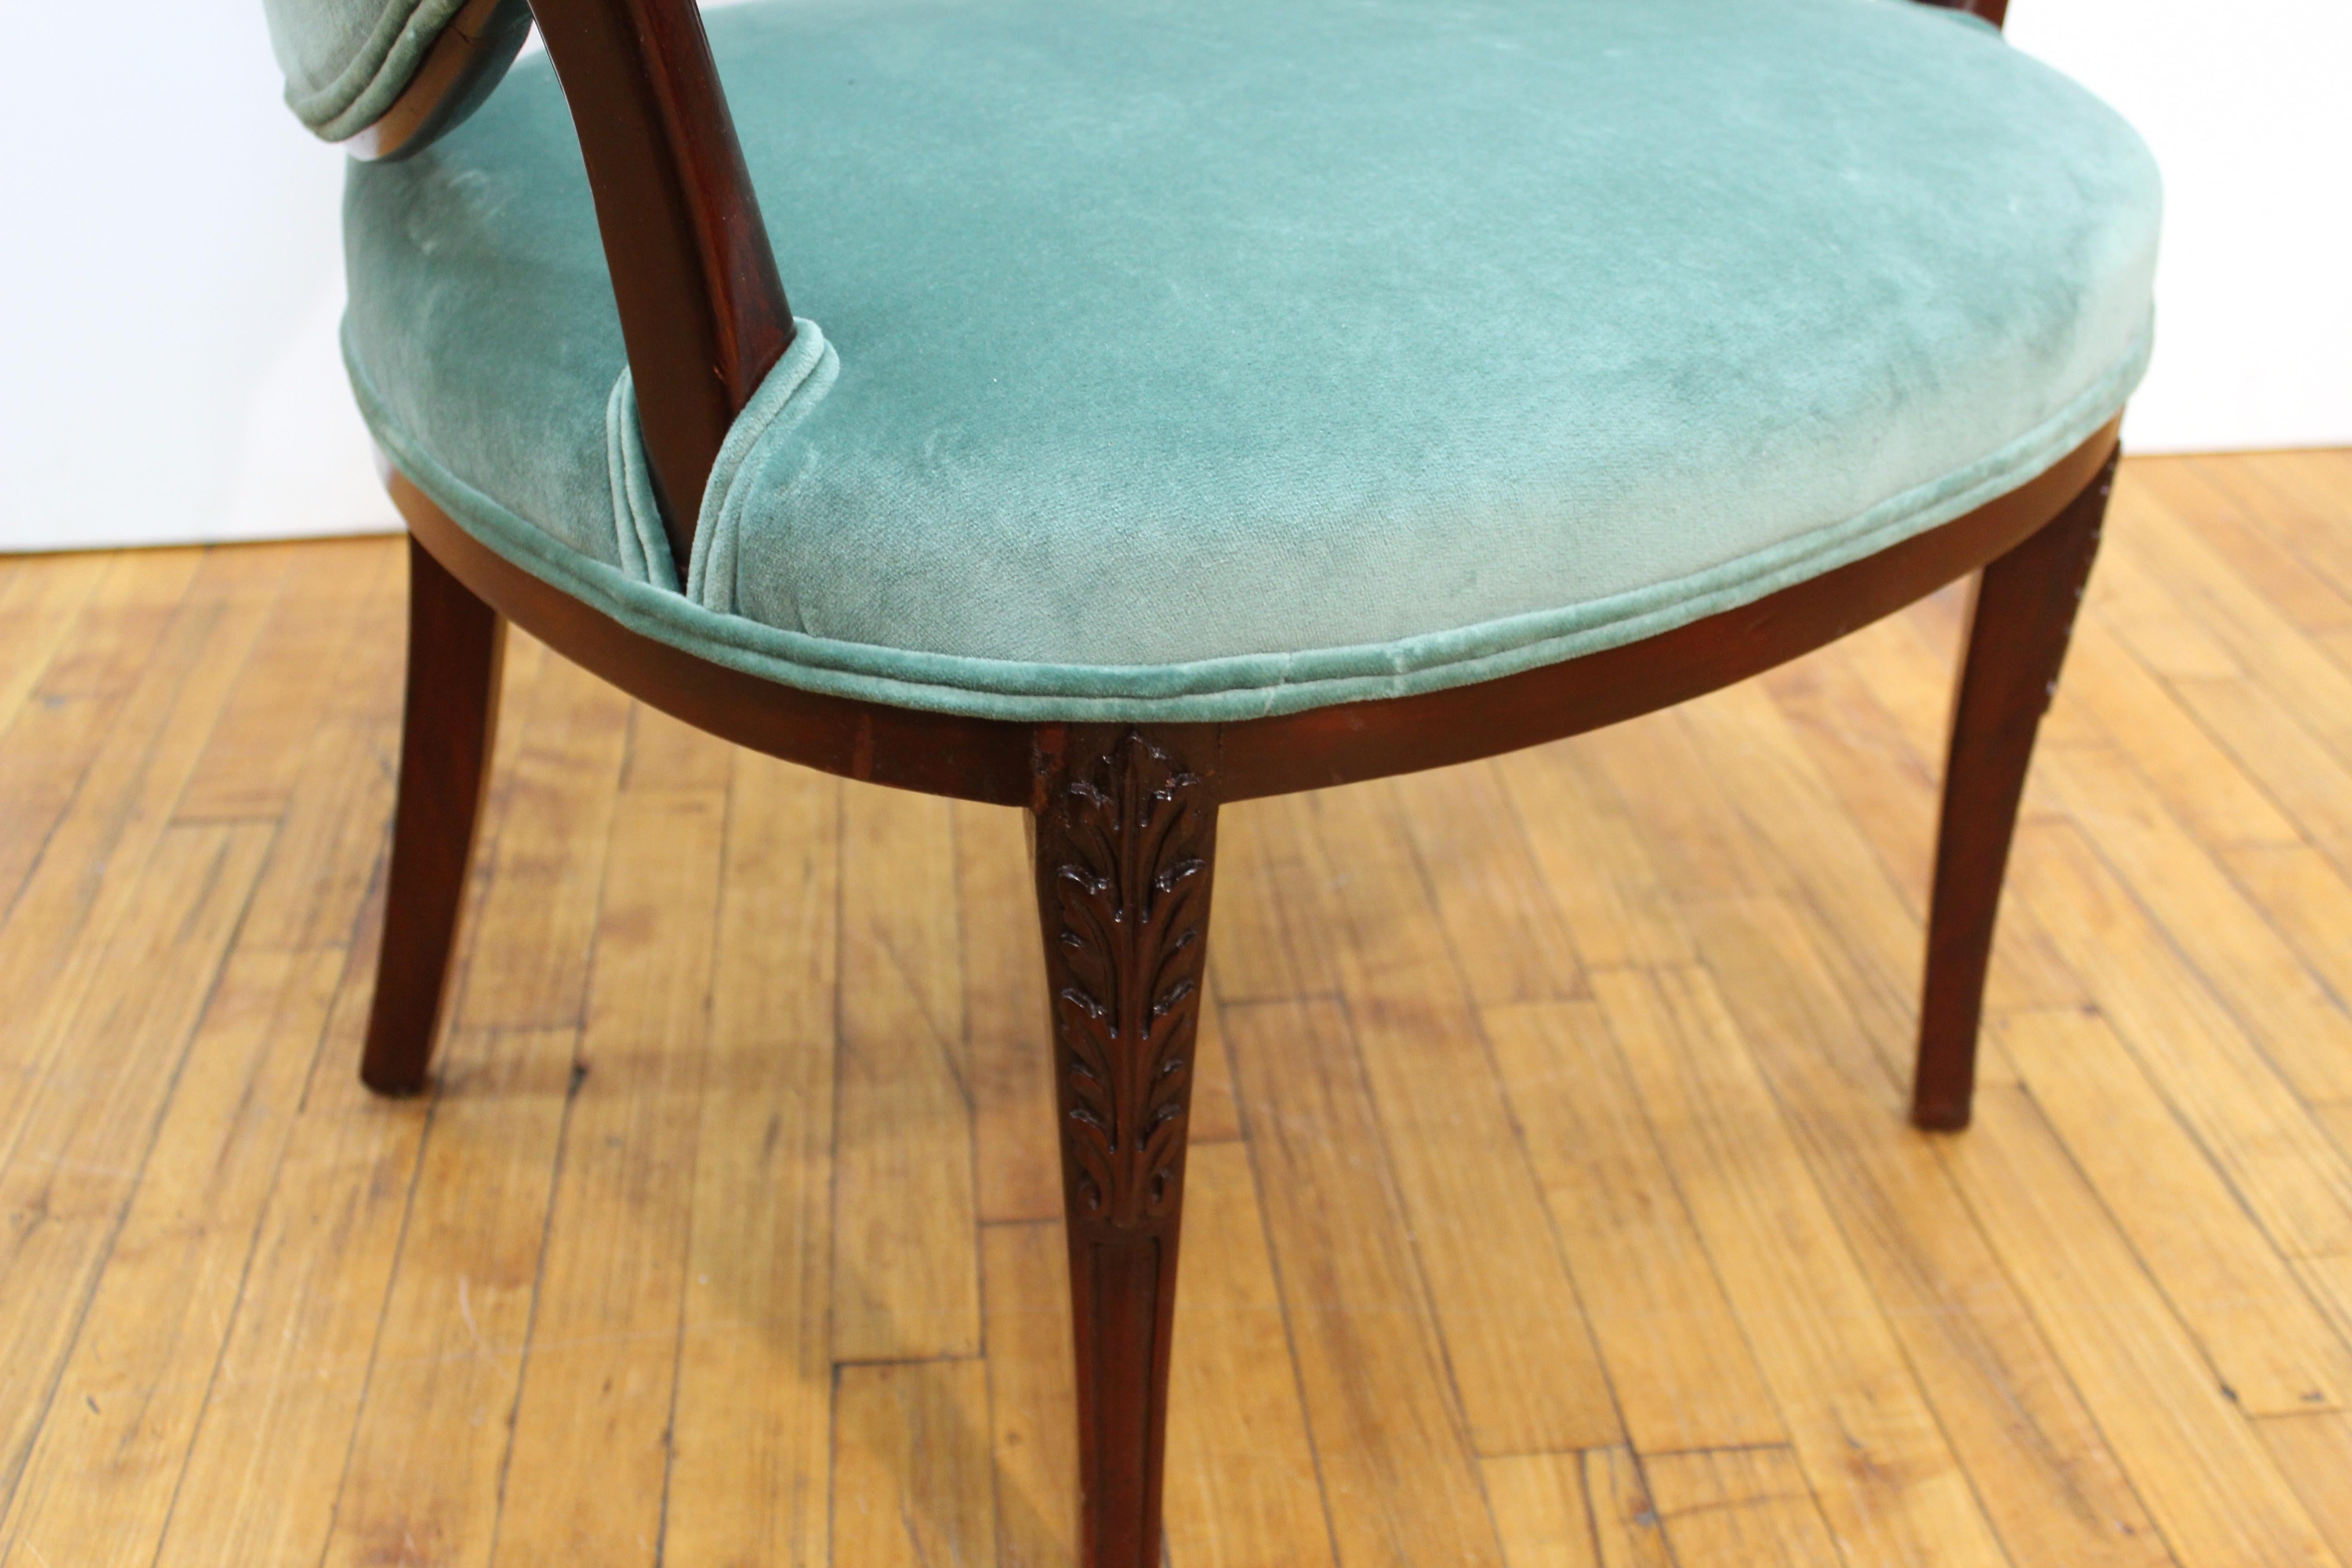 French Art Deco Mahogany Chairs in Jade Green Velvet with Leaf Design 6